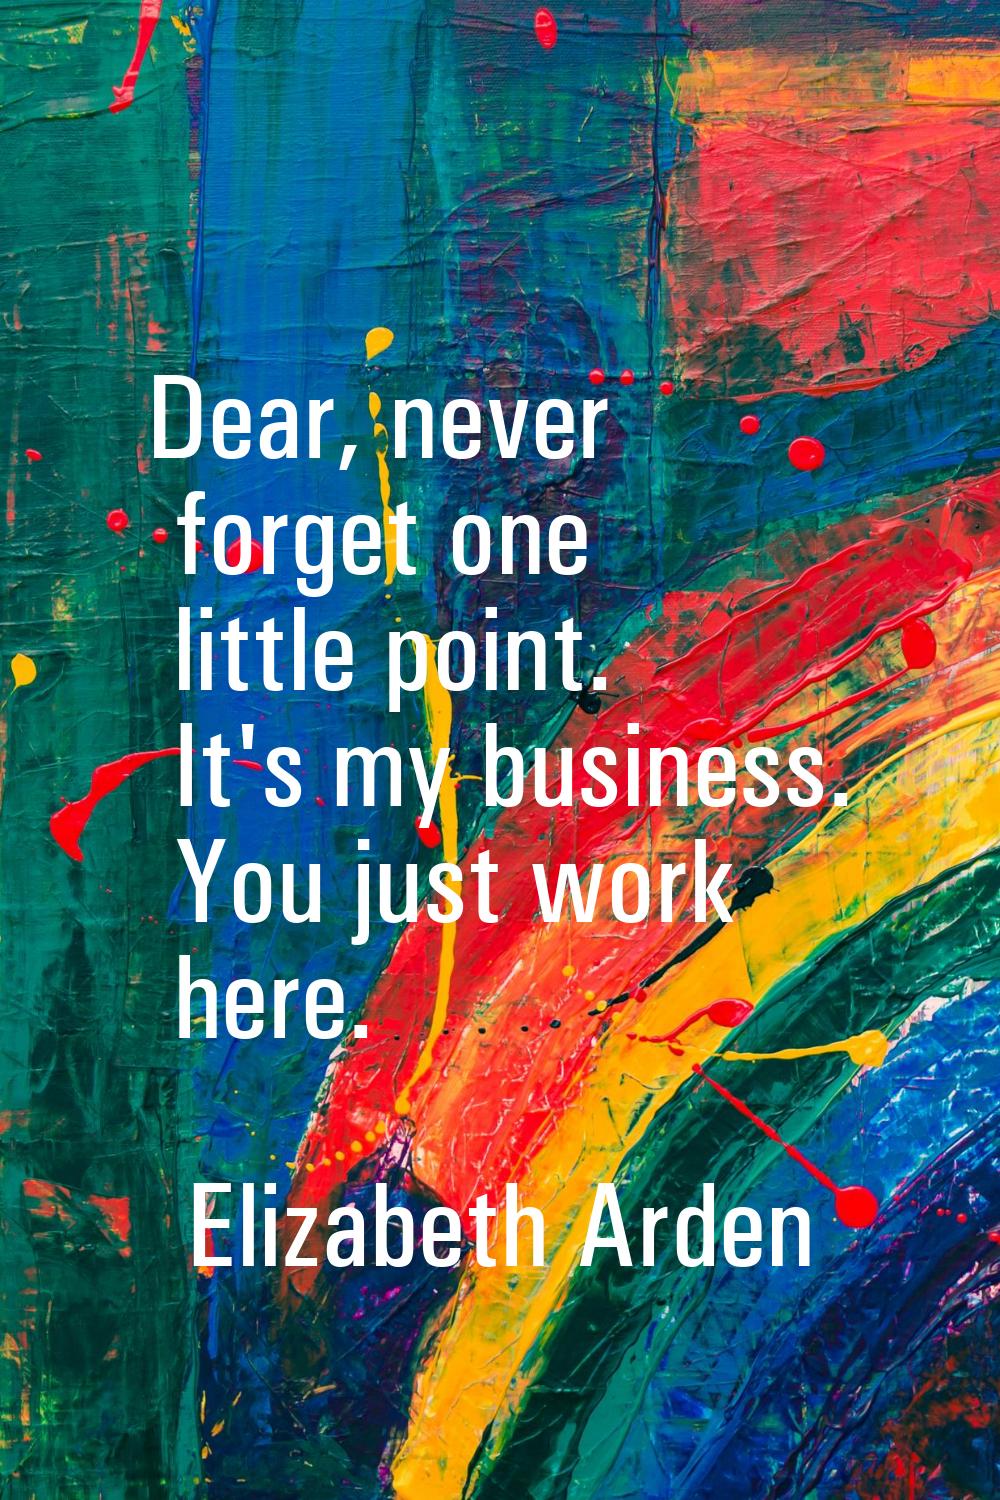 Dear, never forget one little point. It's my business. You just work here.